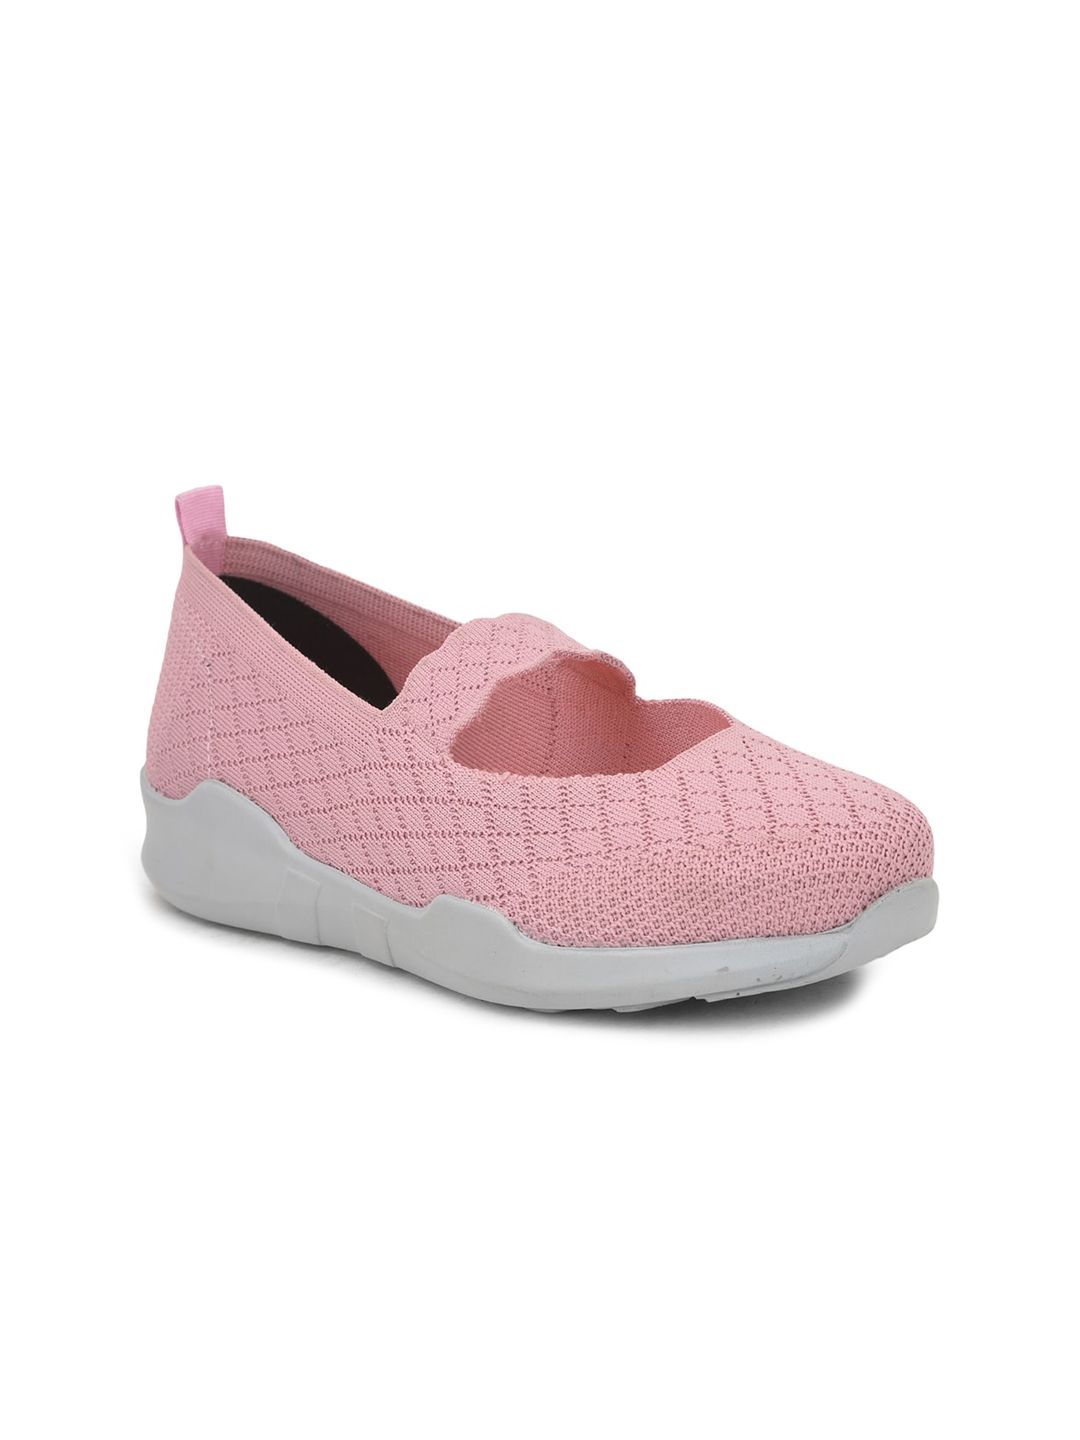 Liberty Women Pink Woven Design Slip-On Sneakers Price in India